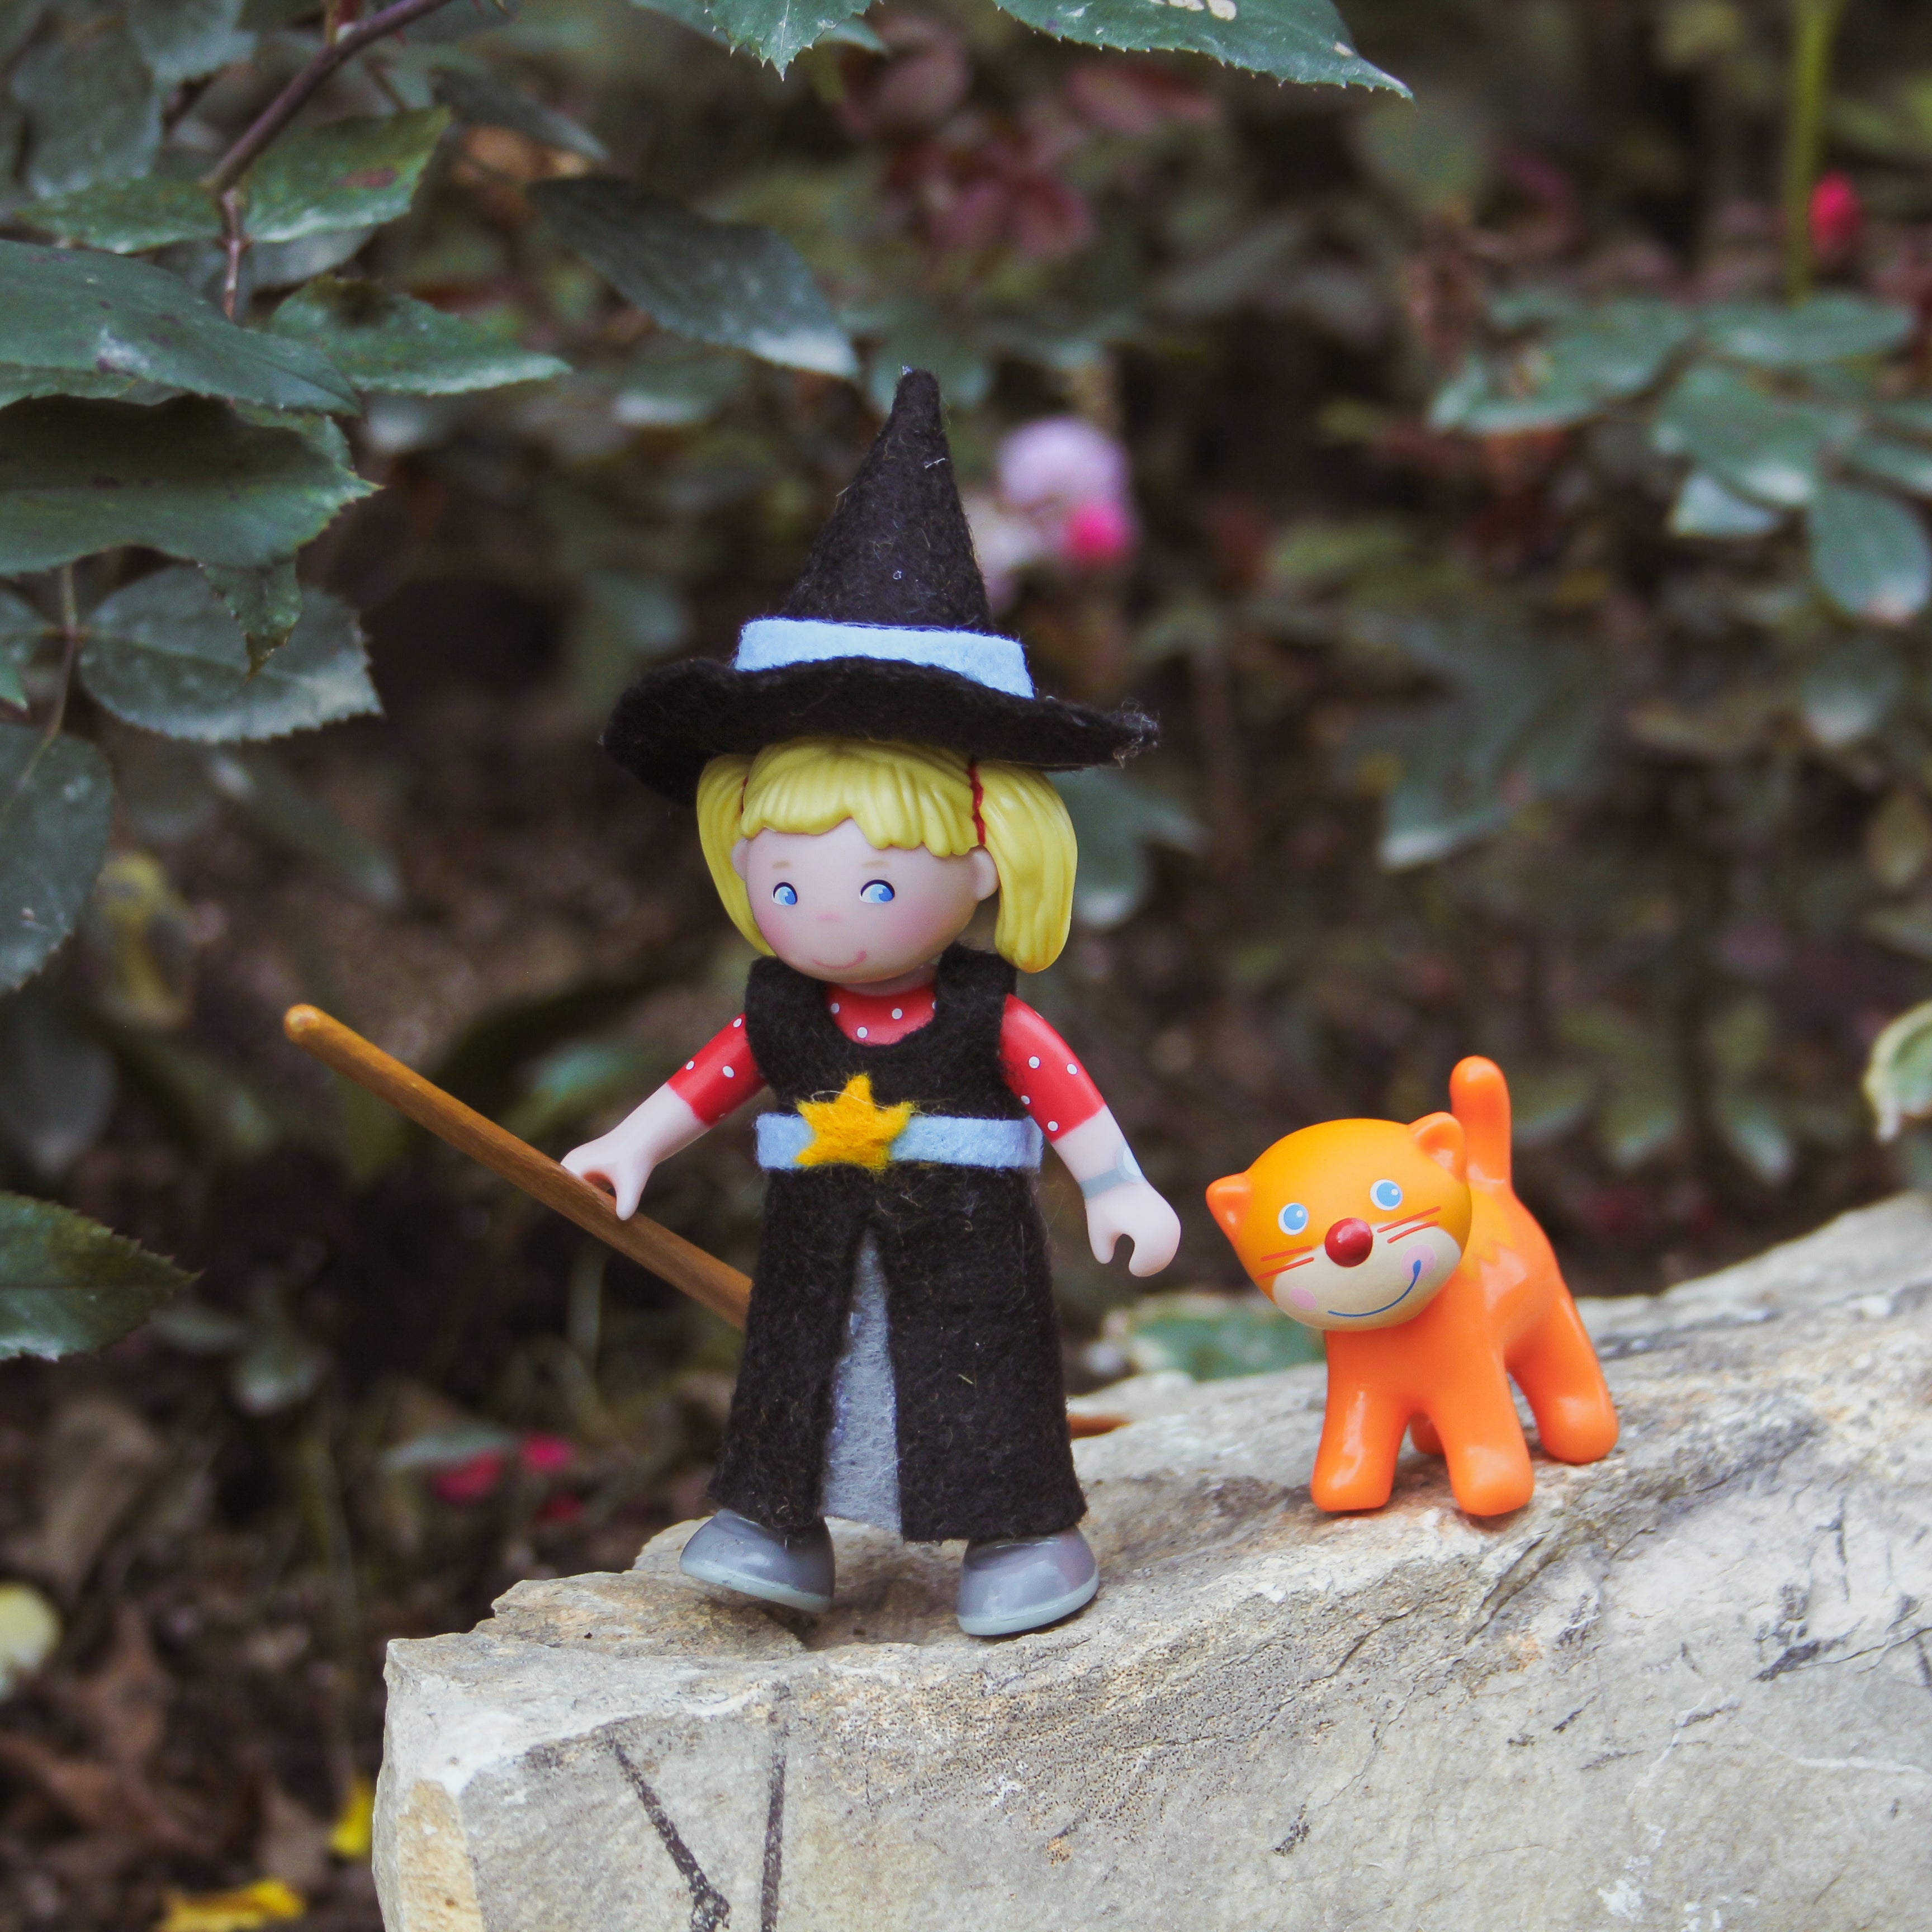 A Little Friends doll in a witch costume with an orange cat stands on a rock.